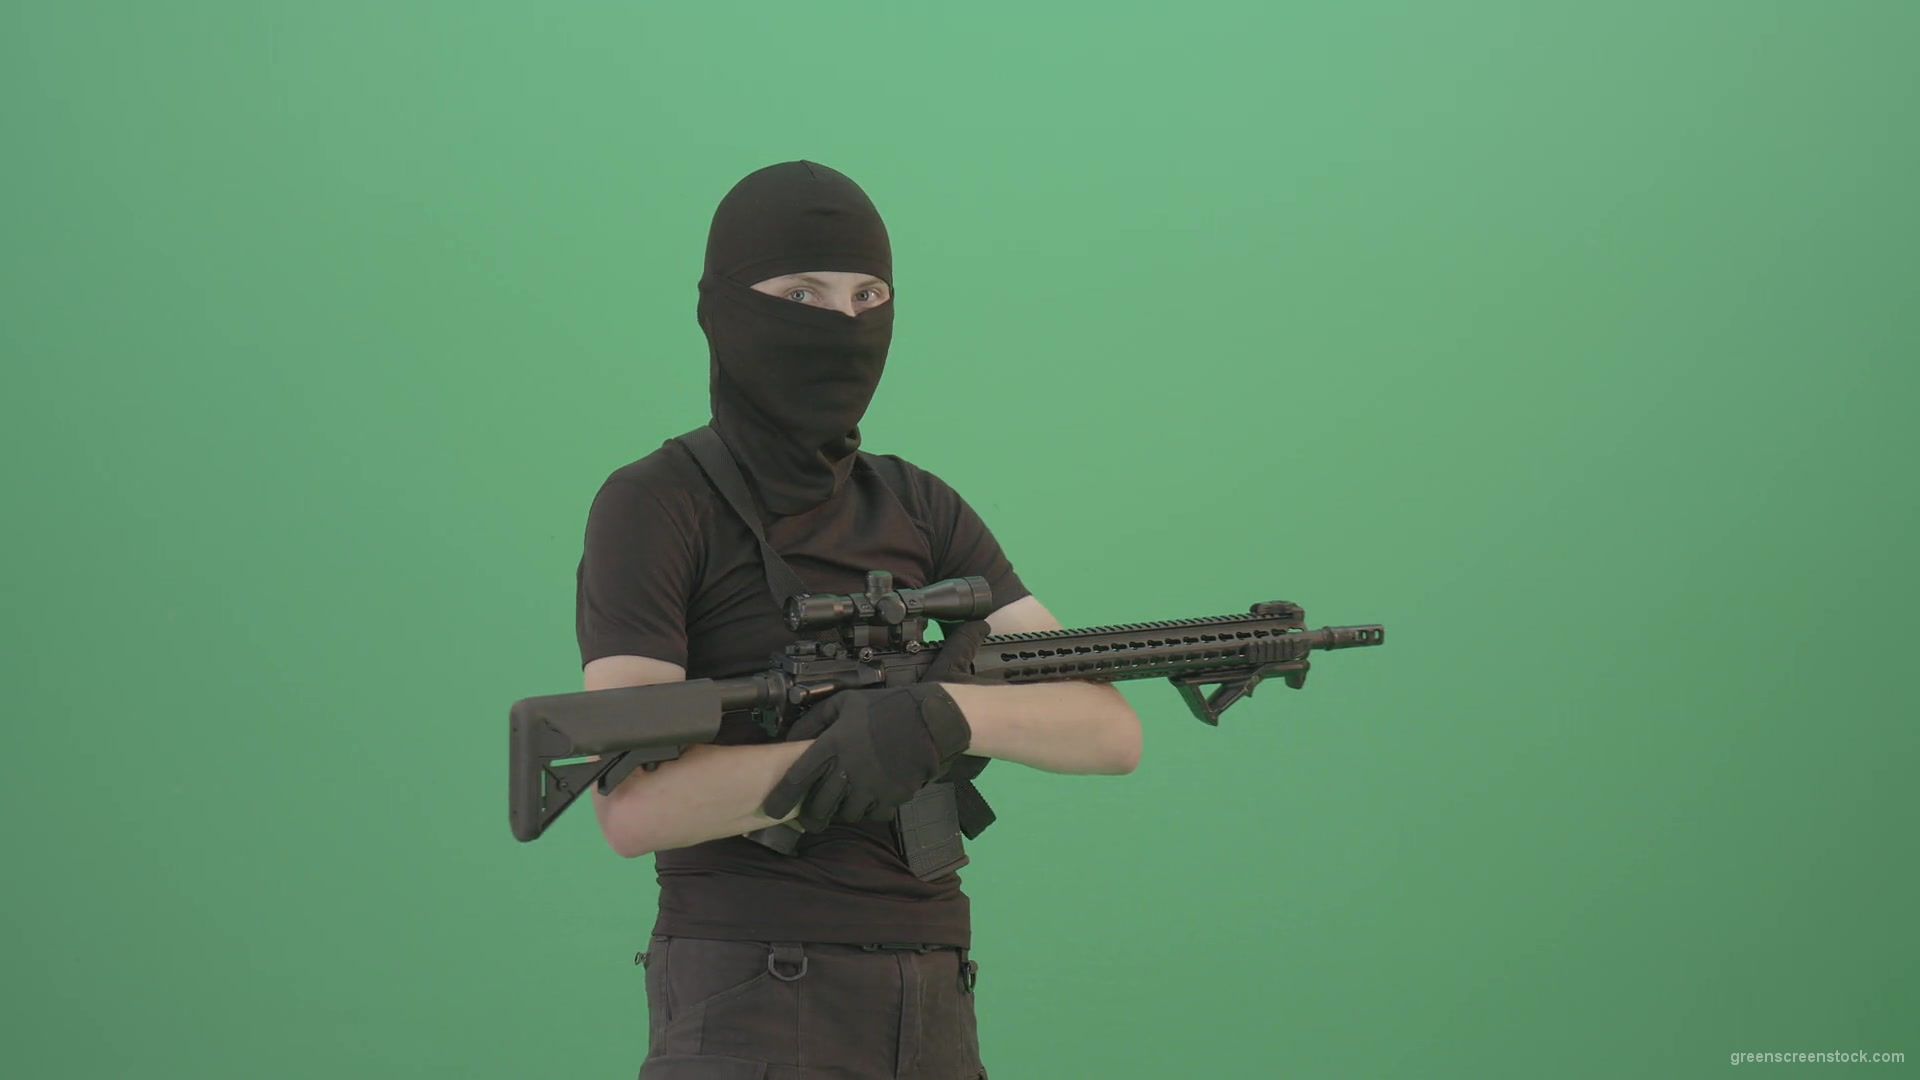 Soldier-man-with-weapon-looking-enemies-isolated-on-green-screen-4K-Video-Footage-1920_008 Green Screen Stock